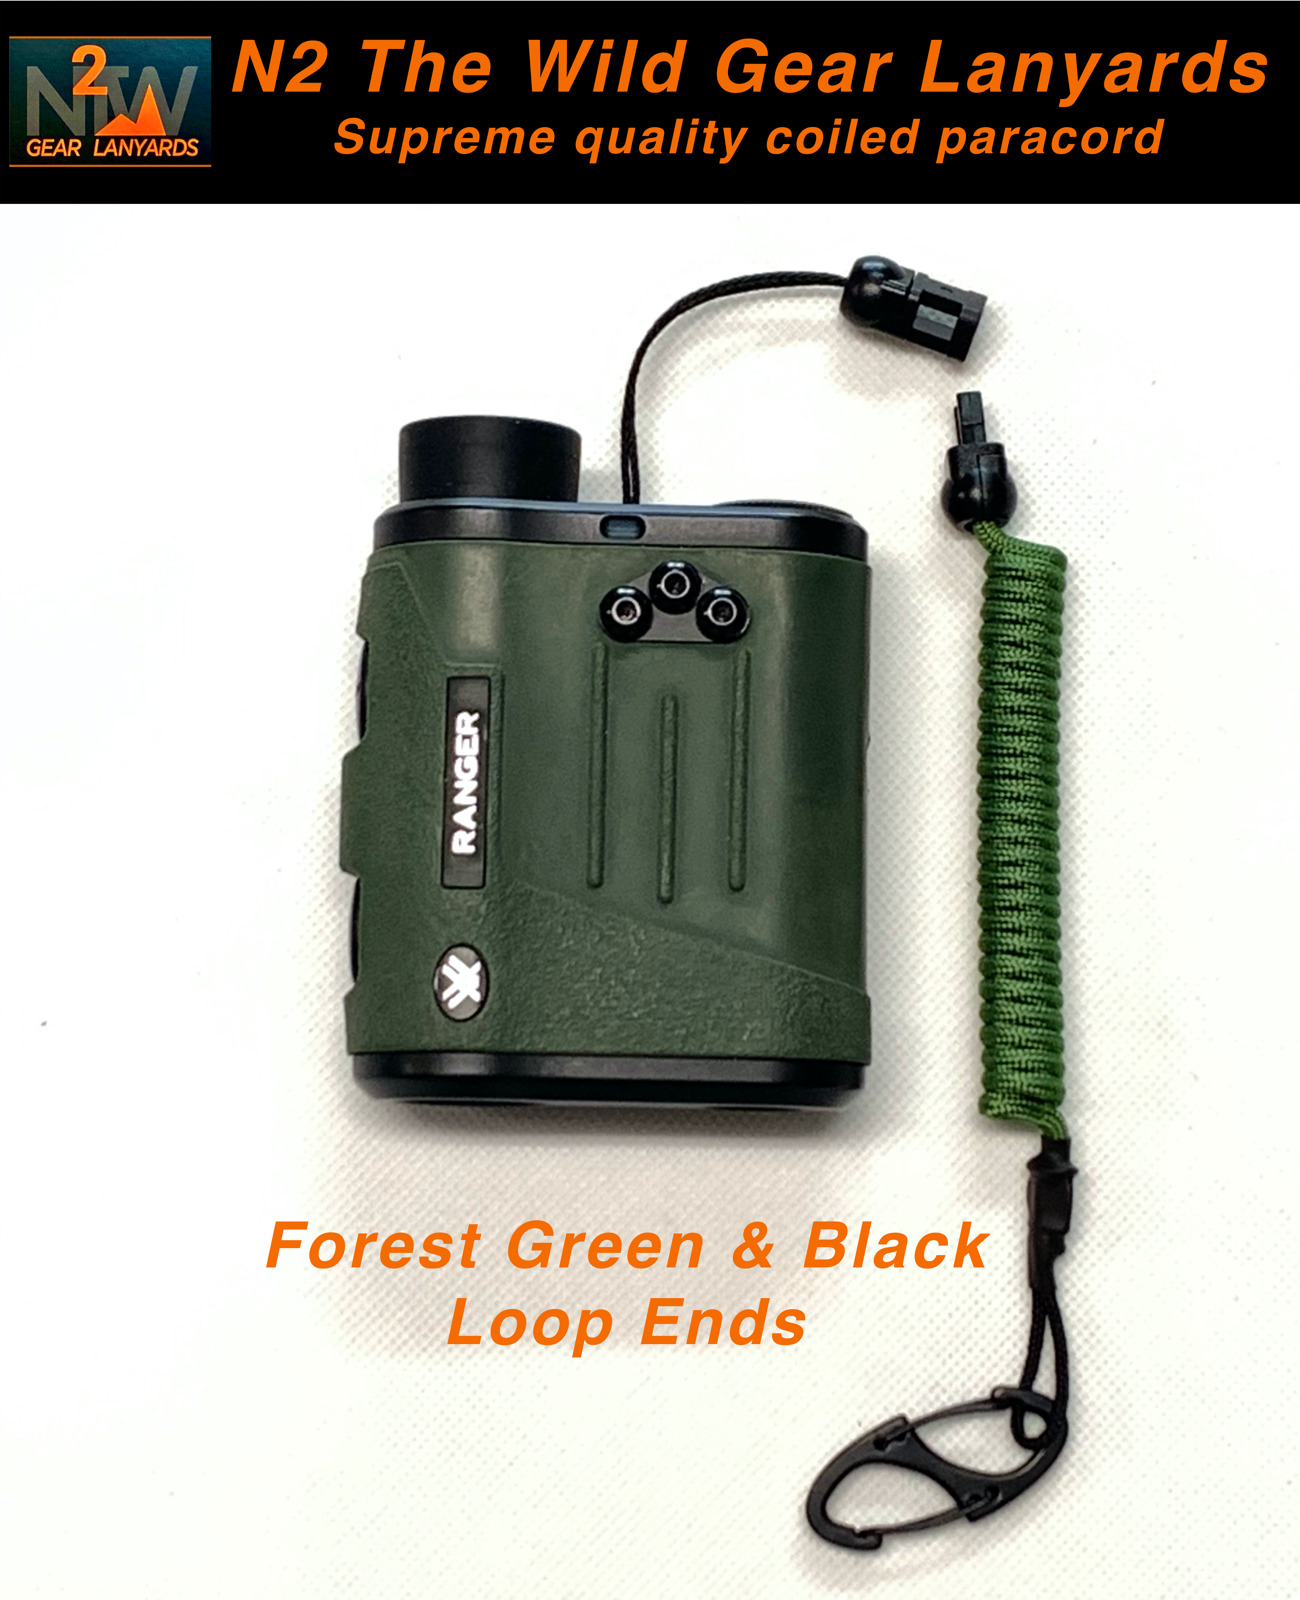 N2 The Wild Gear Lanyards Forest Green & Black Coiled Paracord Lanyard Tether